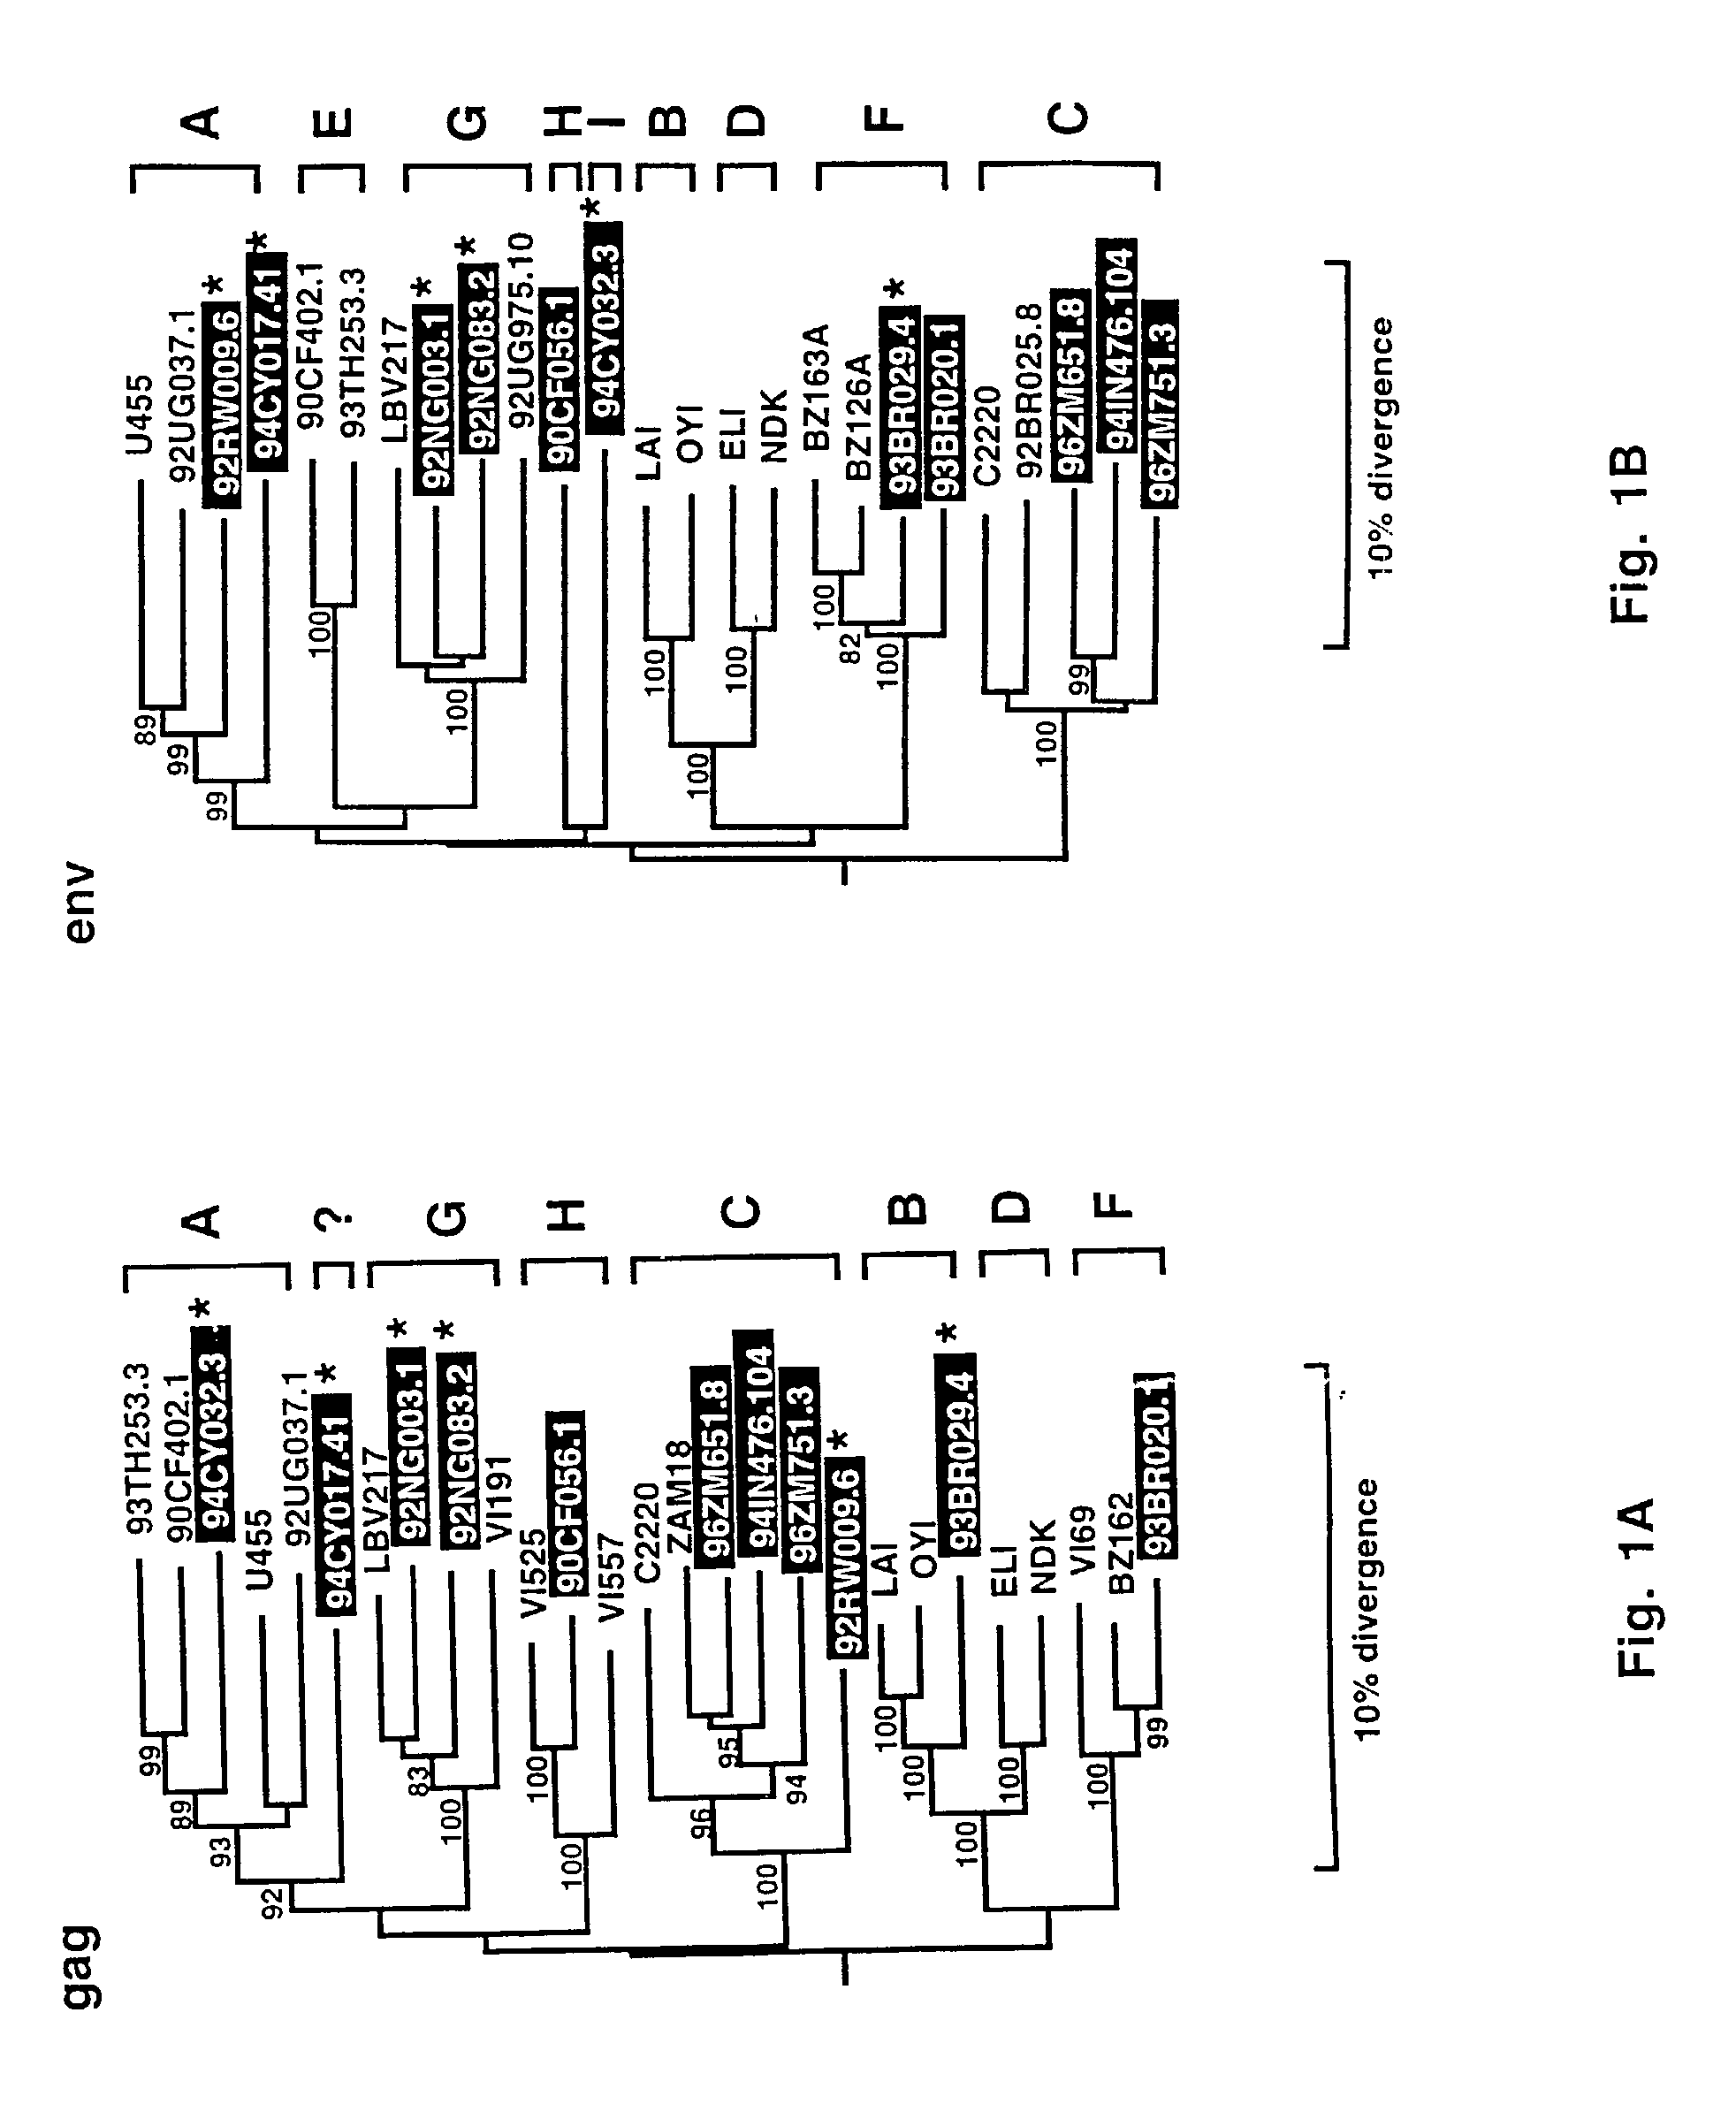 Reference clones and sequences for non-subtype B isolates of human immunodeficiency virus type 1